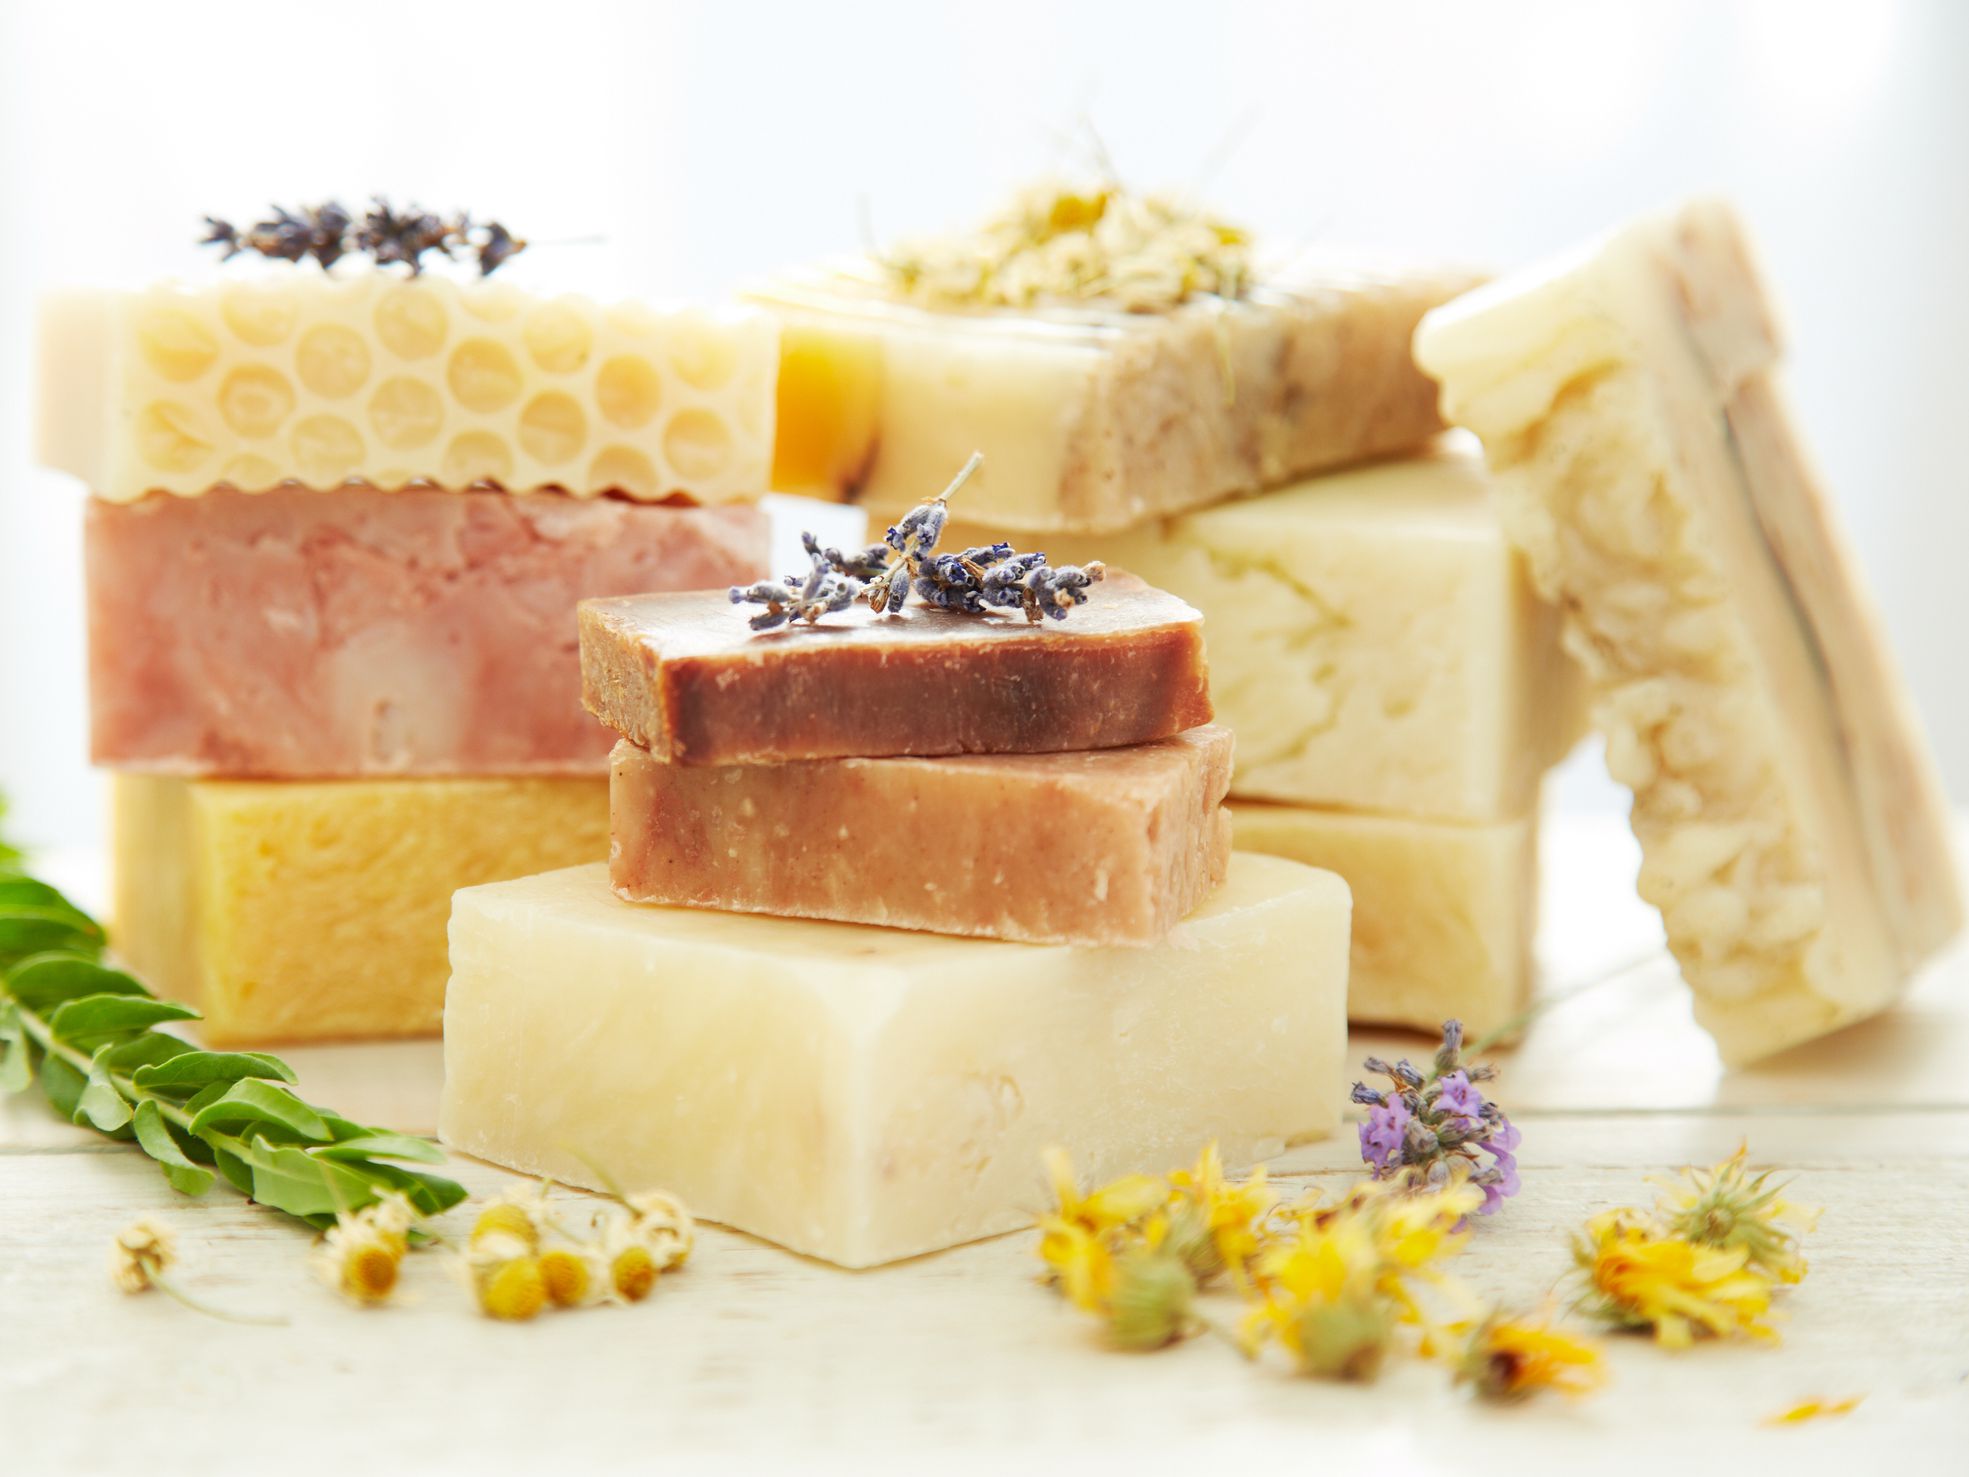 What are the best fragrance sources for homemade soap? - Quora